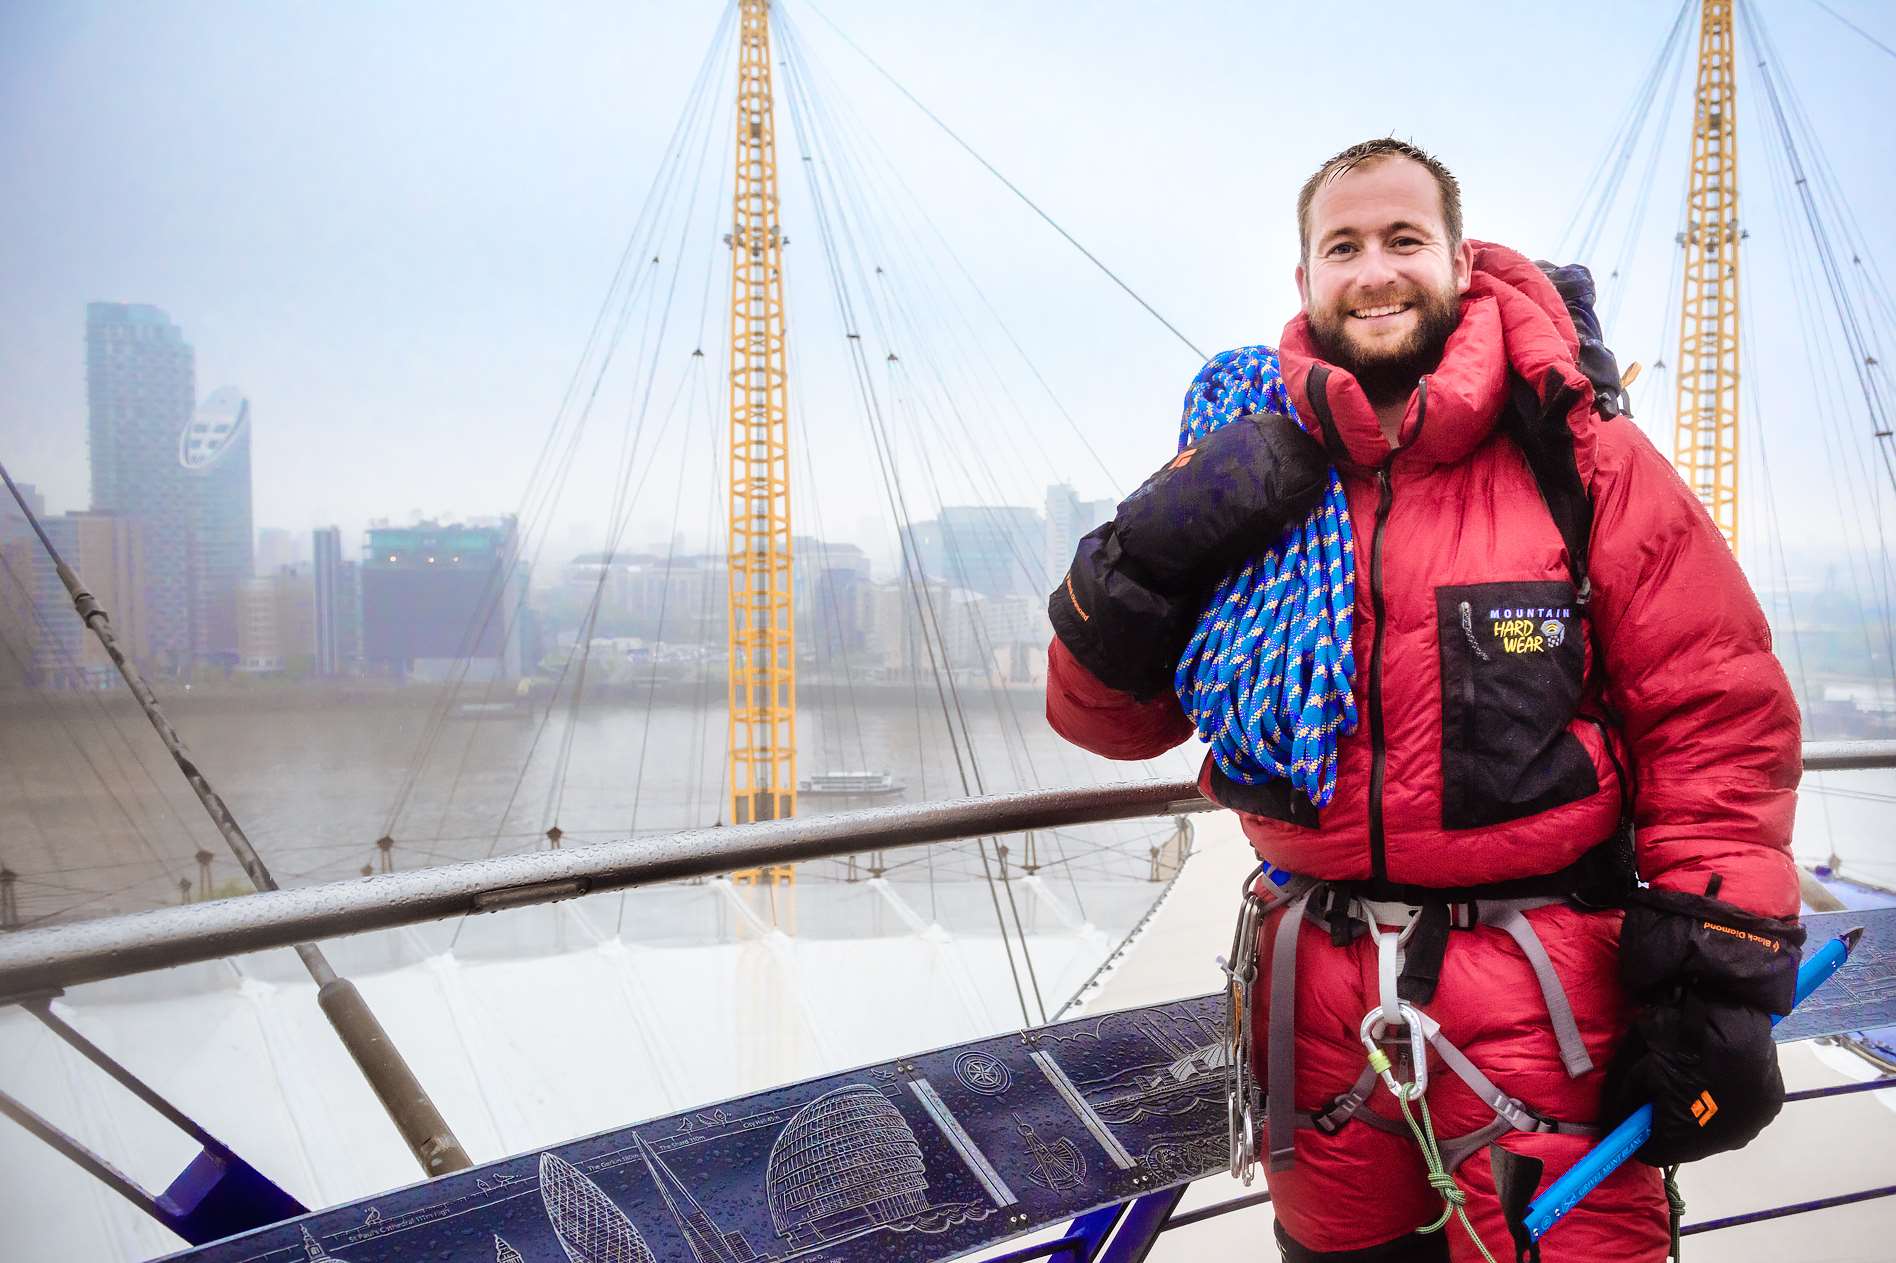 Adventurer James Ketchell will be at the summit of Up at the O2 for Father's Day